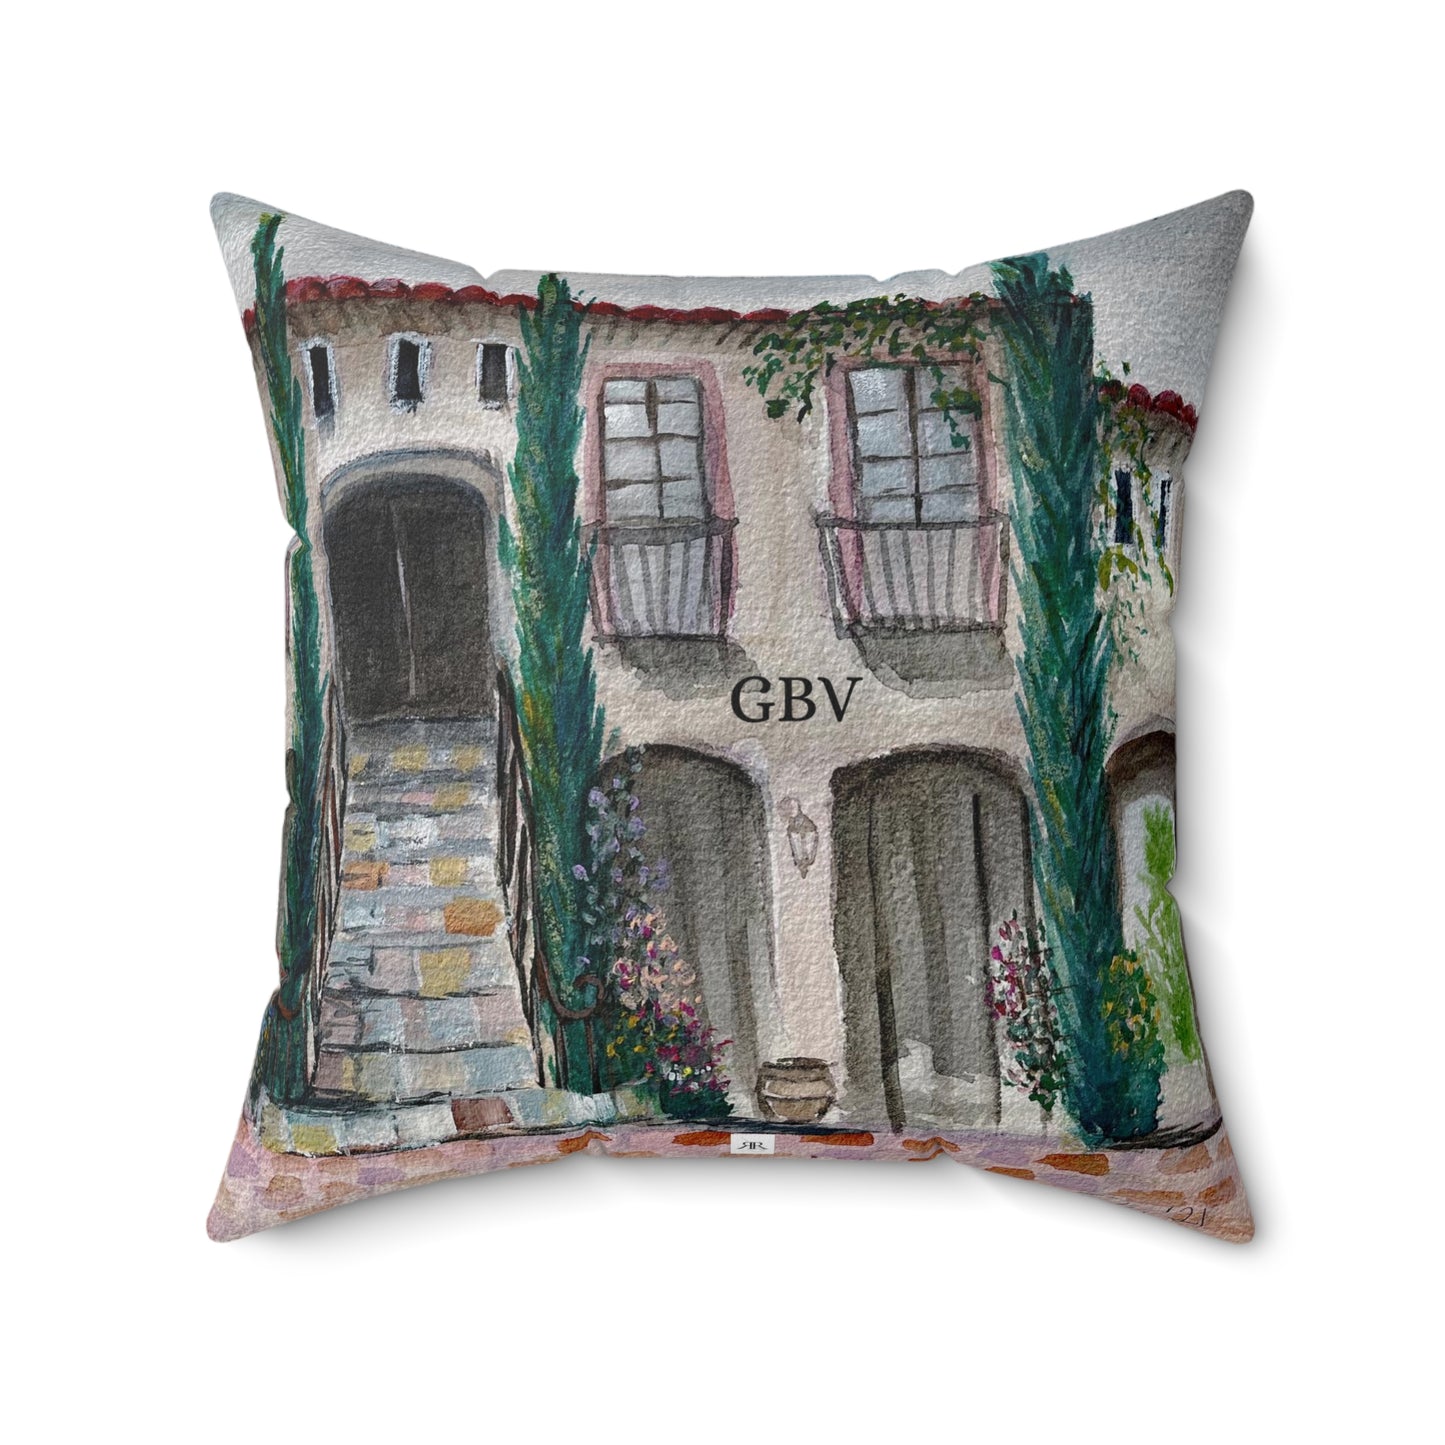 The Villa -GBV Indoor Spun Polyester Square Pillow